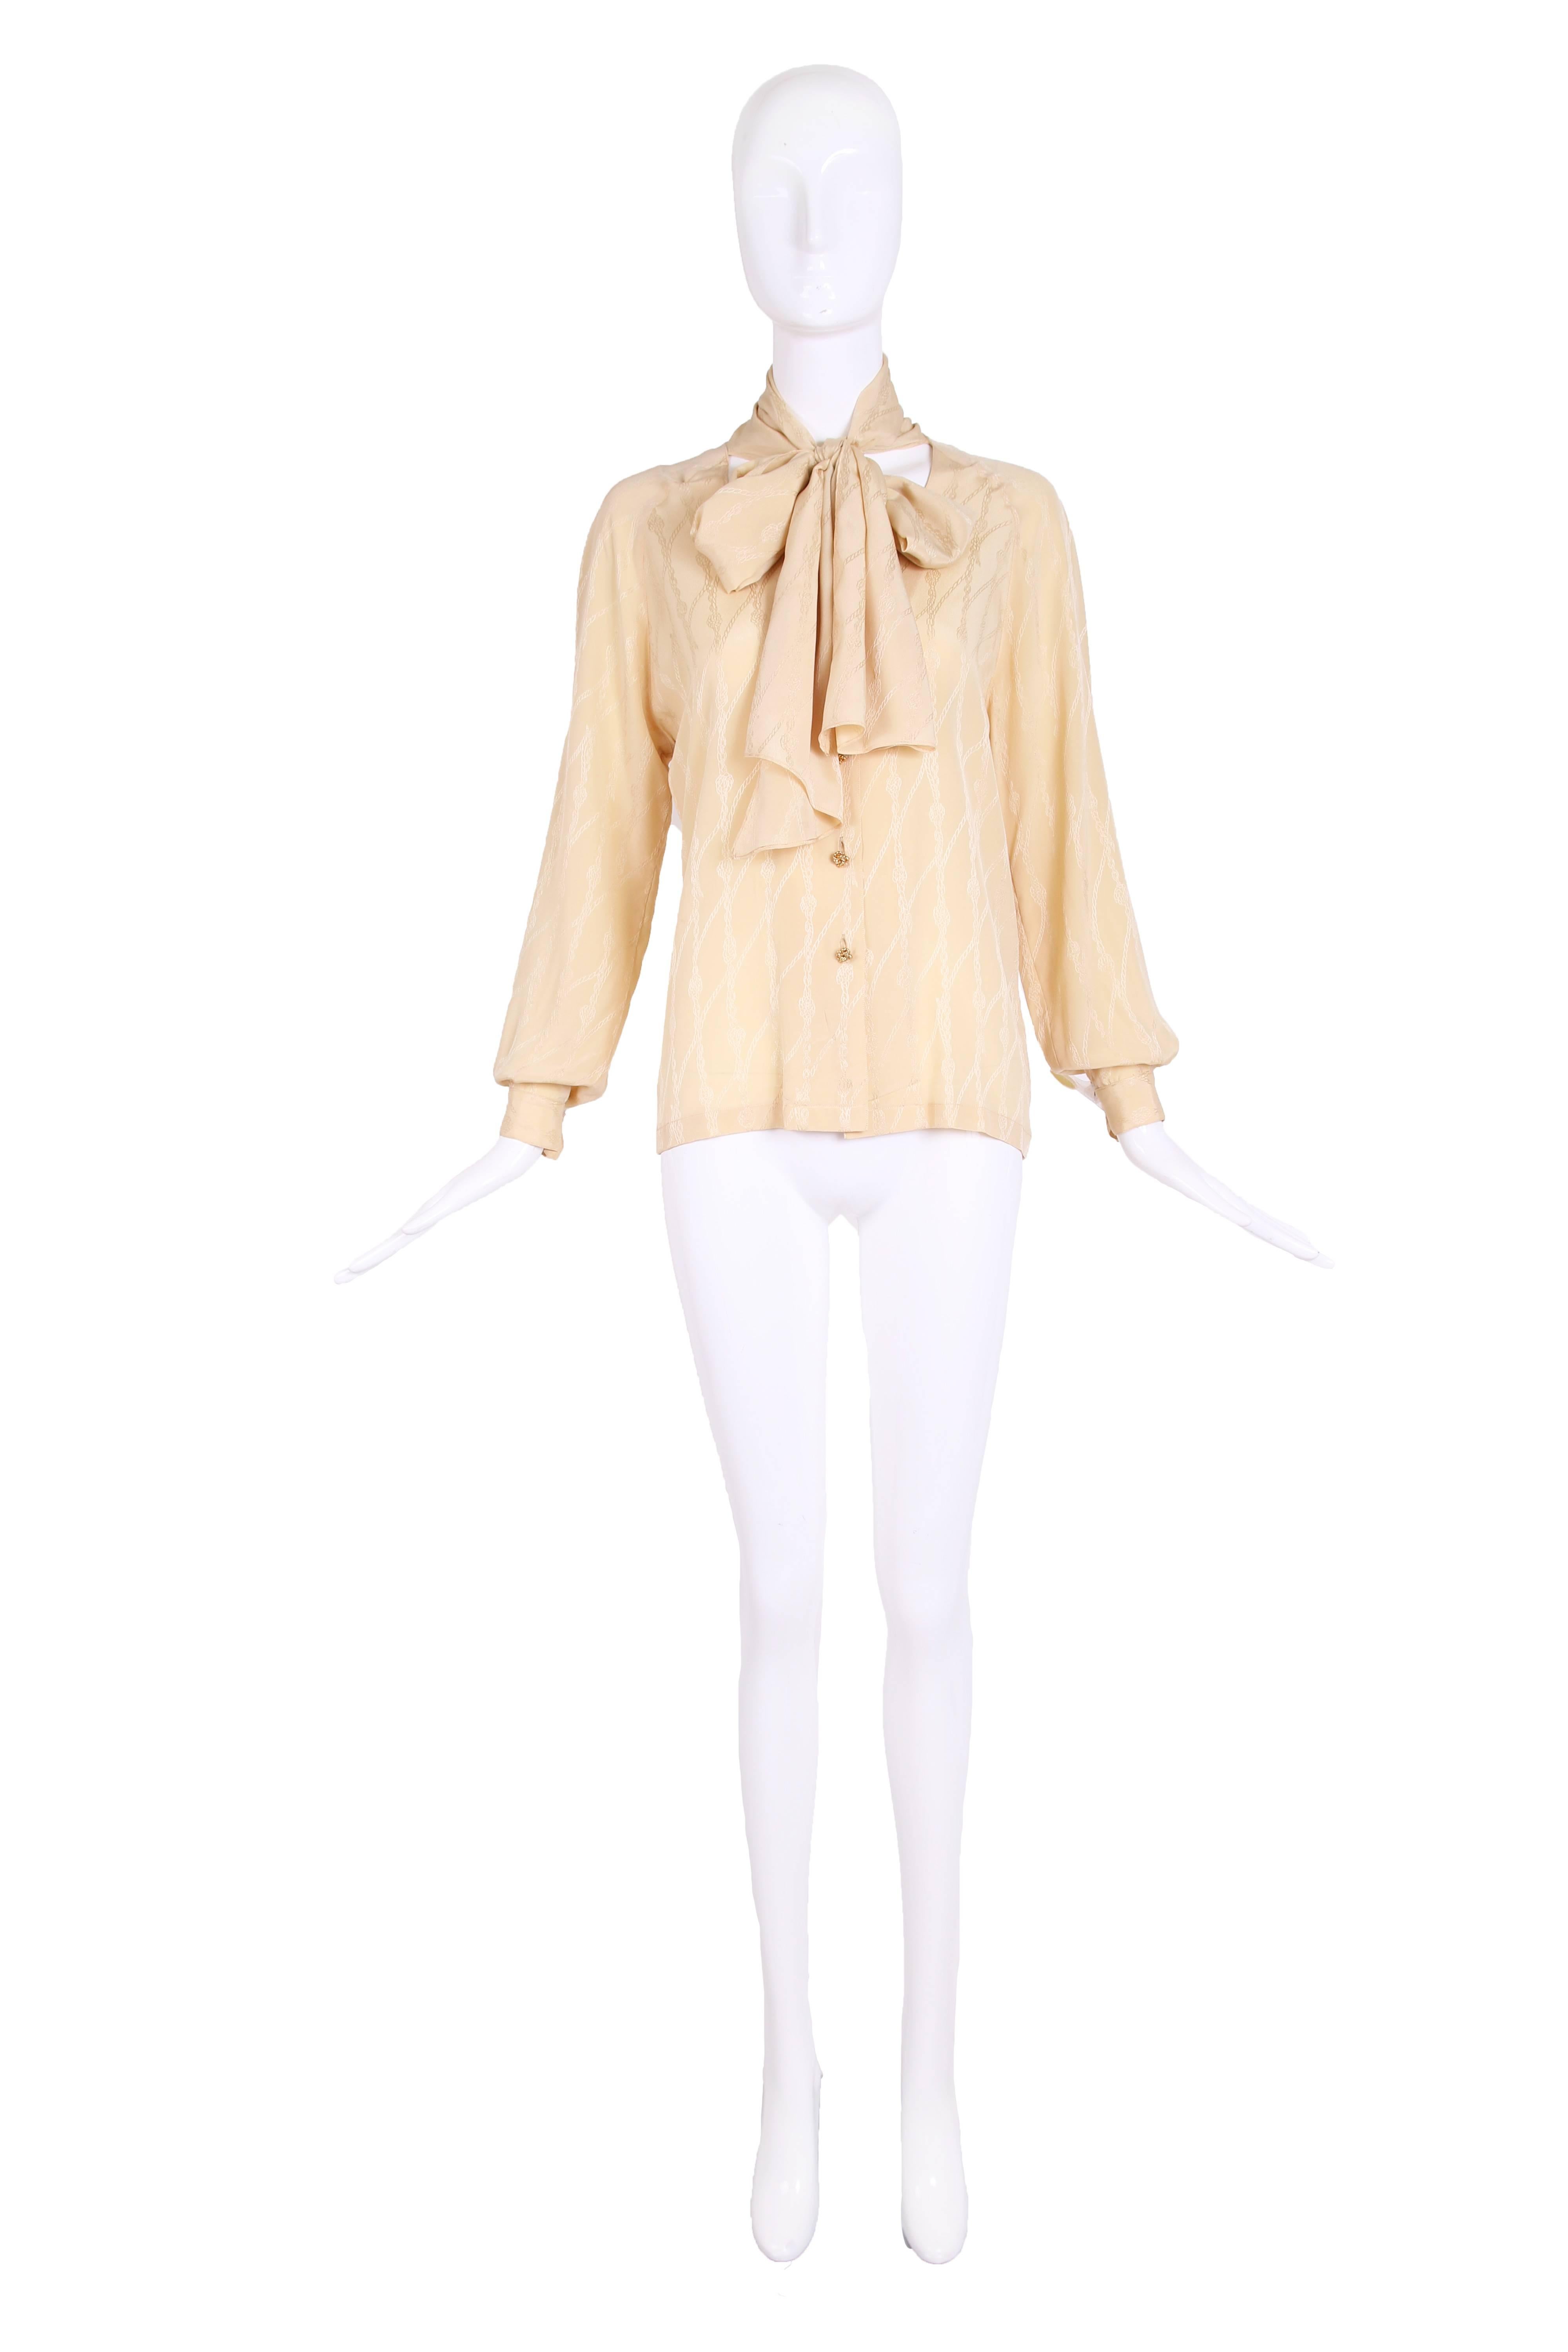 1970's Hermes creme silk blouse with chain print & gold tone metal buttons. Has scarf attached at back neck which can hang down in a loose loop or be tied in a pussy bow. IN excellent condition - size 46 though most likely smaller due to modern